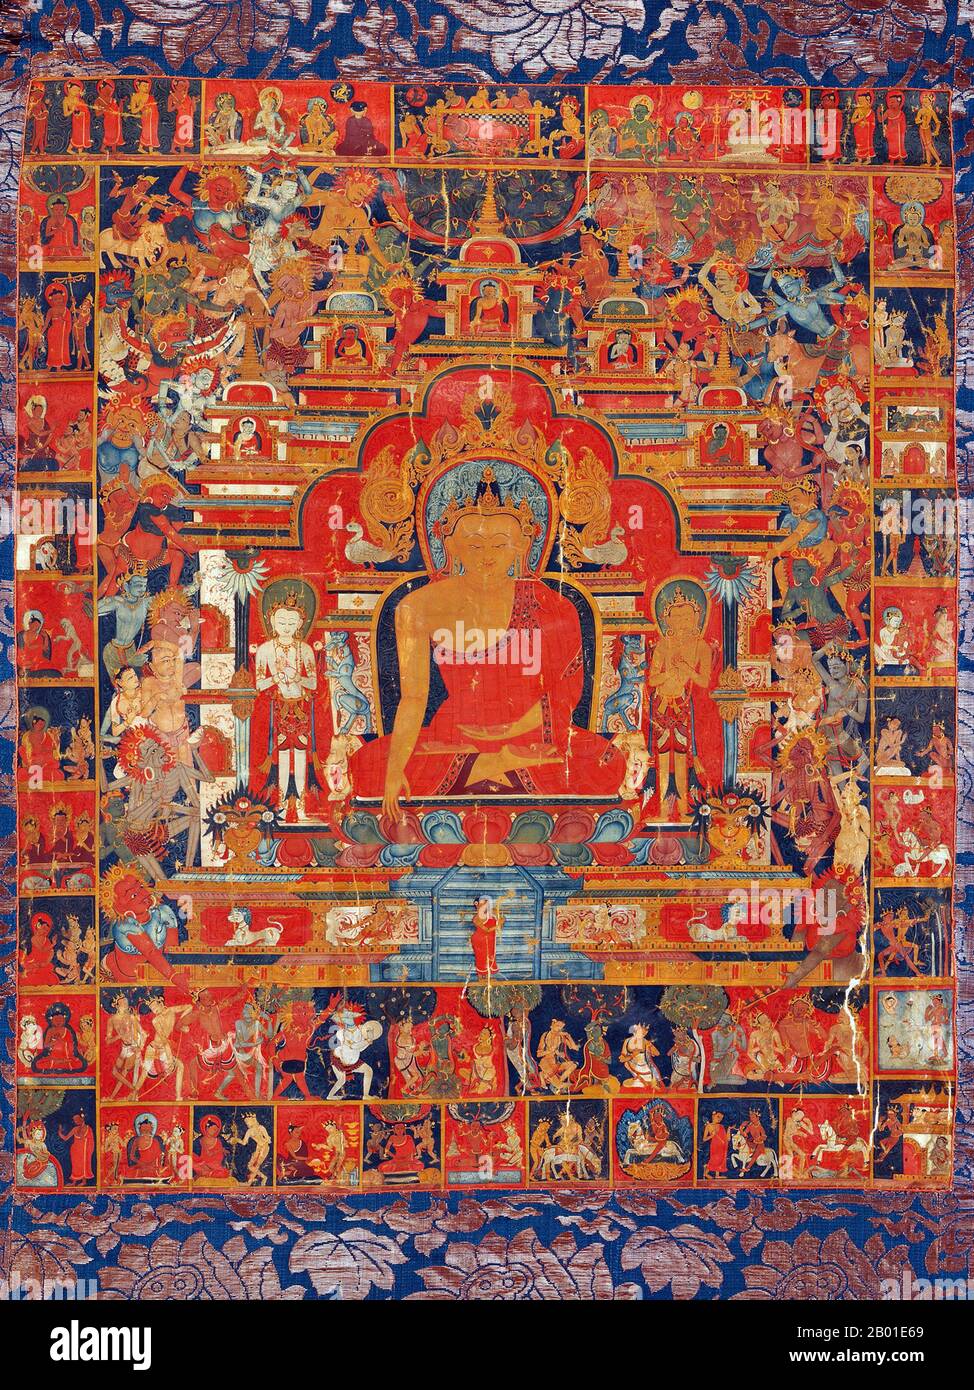 Tibet/China: Thangka painting with scenes from the life of Sakyamuni Buddha, Lhasa, 14th century.  Siddhārtha Gautama (Sanskrit: सिद्धार्थ गौतम; Pali: Siddhattha Gotama) was a spiritual teacher from ancient India who founded Buddhism. In most Buddhist traditions, he is regarded as the Supreme Buddha (P. sammāsambuddha, S. samyaksaṃbuddha) of our age, 'Buddha' meaning 'awakened one' or 'enlightened one'.  The time of his birth and death are uncertain: most early 20th-century historians dated his lifetime as c. 563 BCE to 483 BCE, but more recent opinion dates his death to between 486-483 BCE. Stock Photo